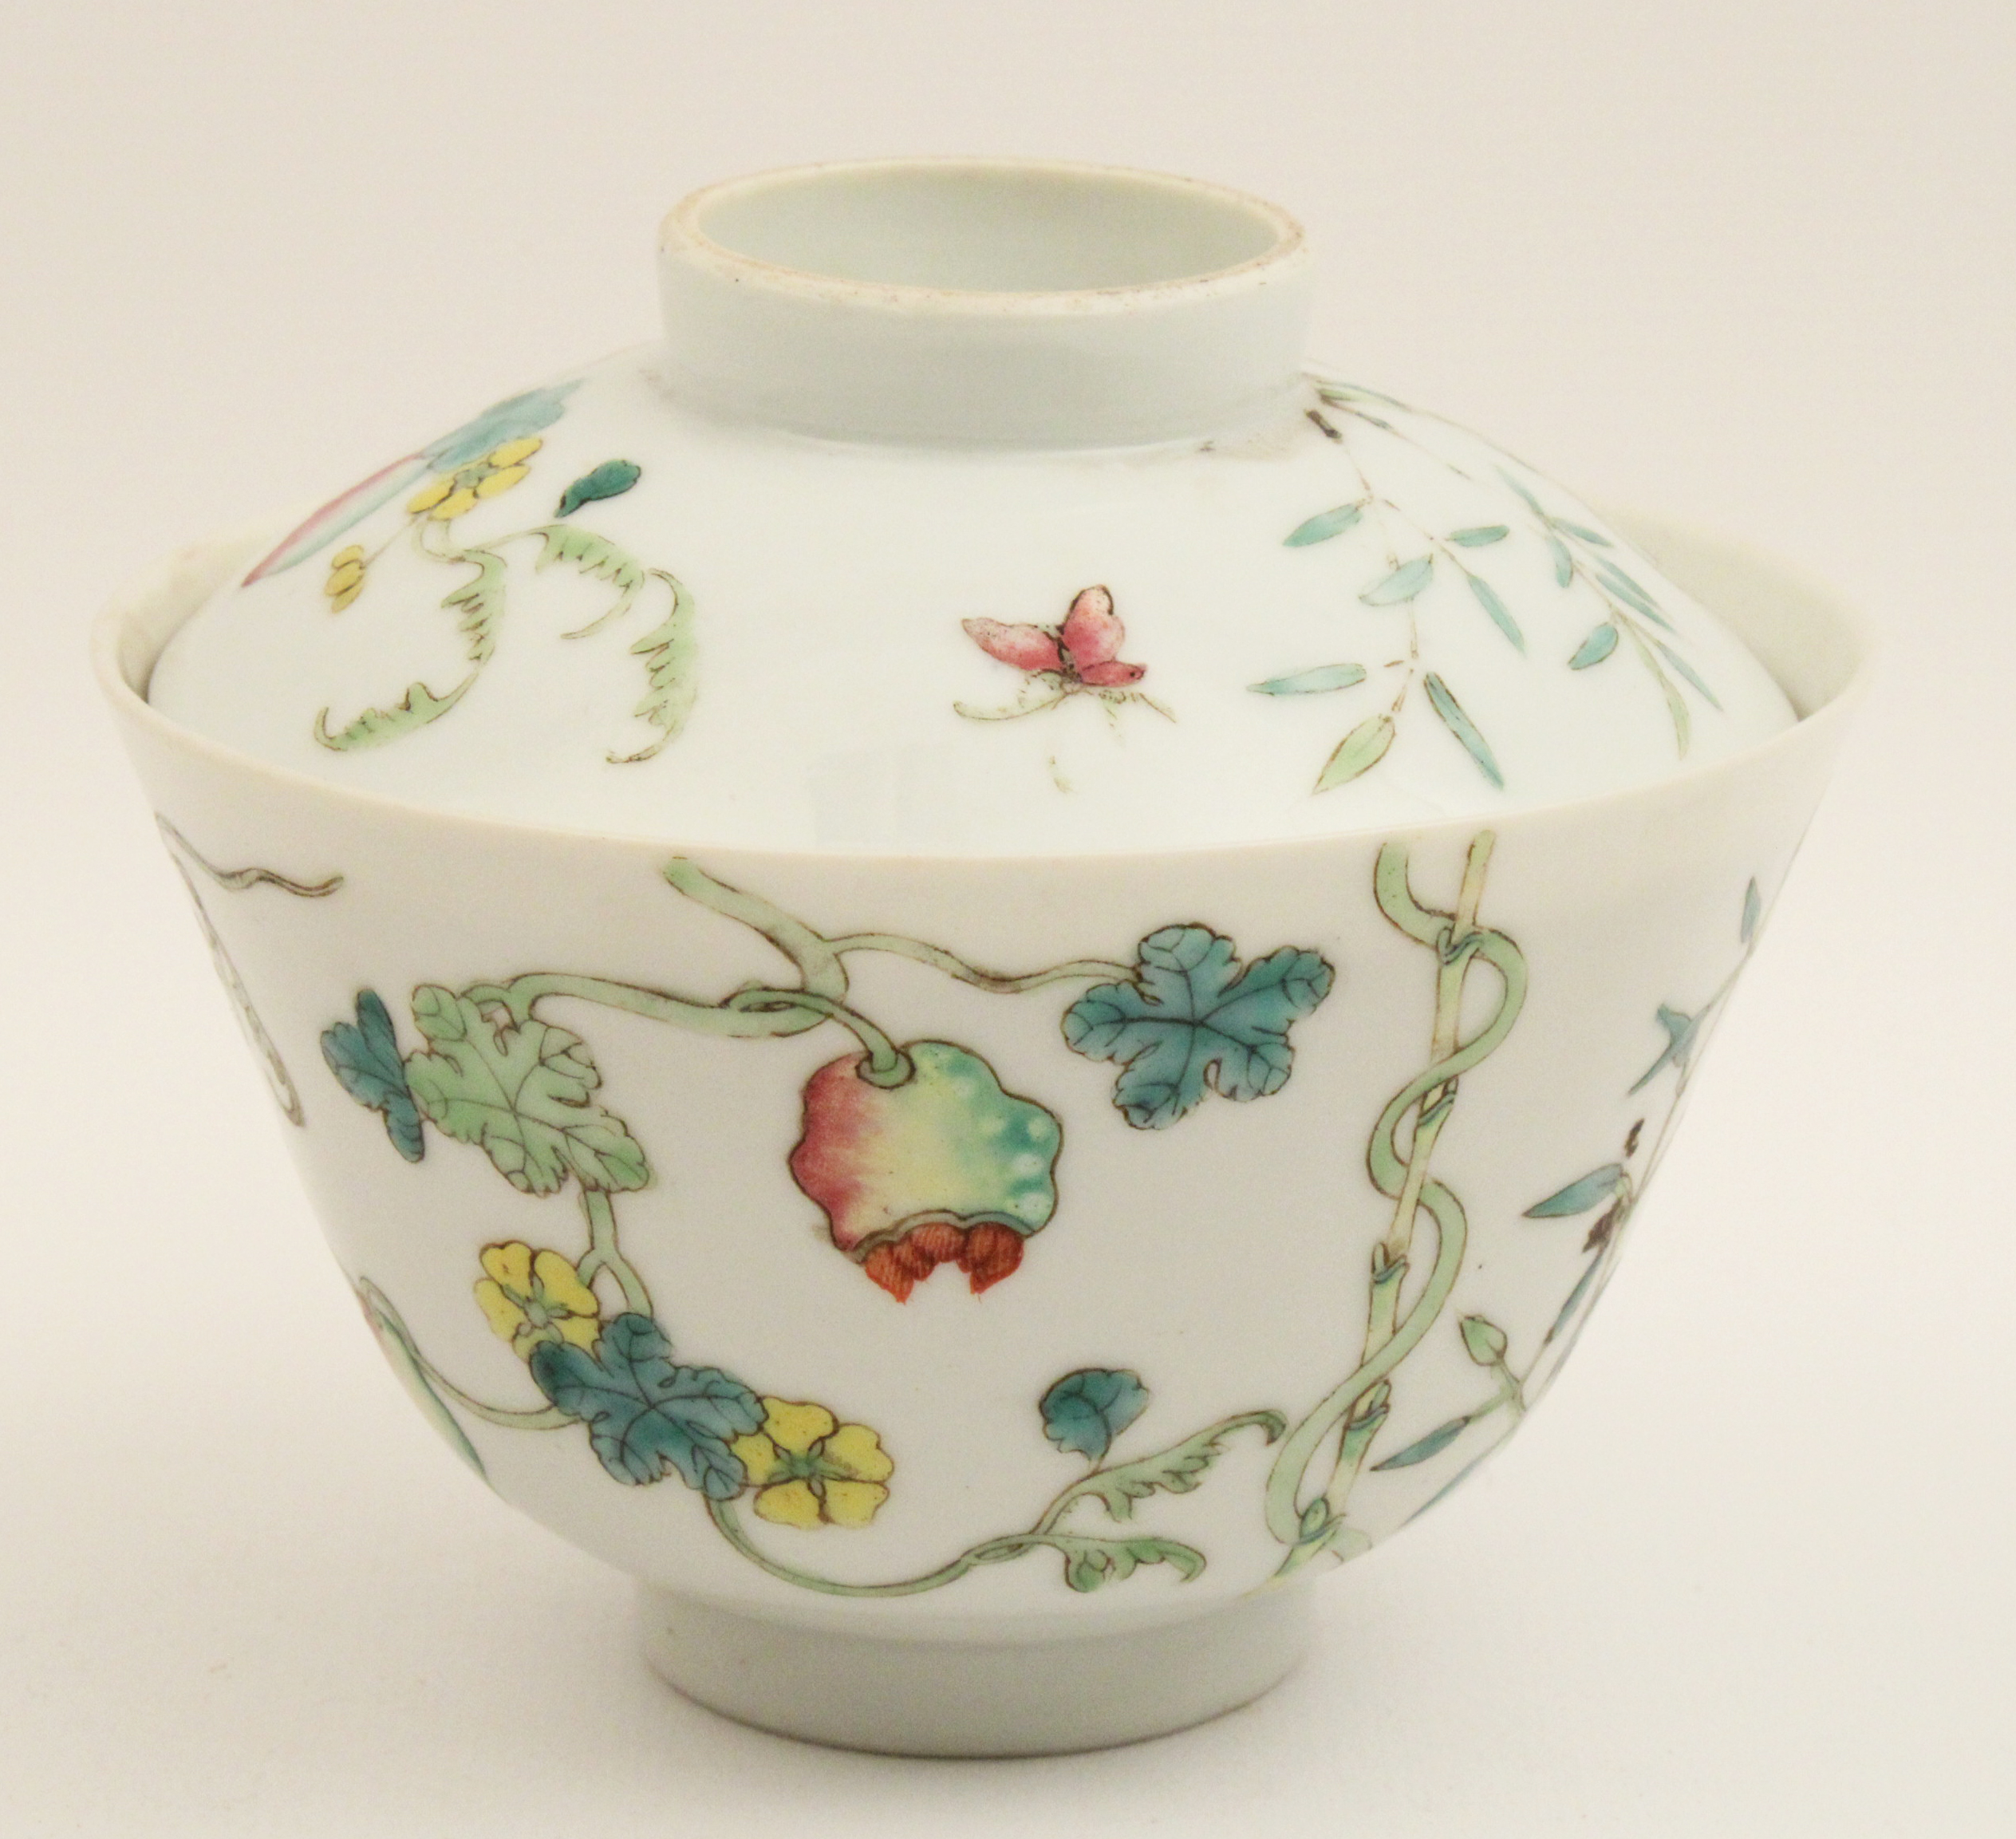 QING DYNASTY FOOTED CUP COVERED 35f85a